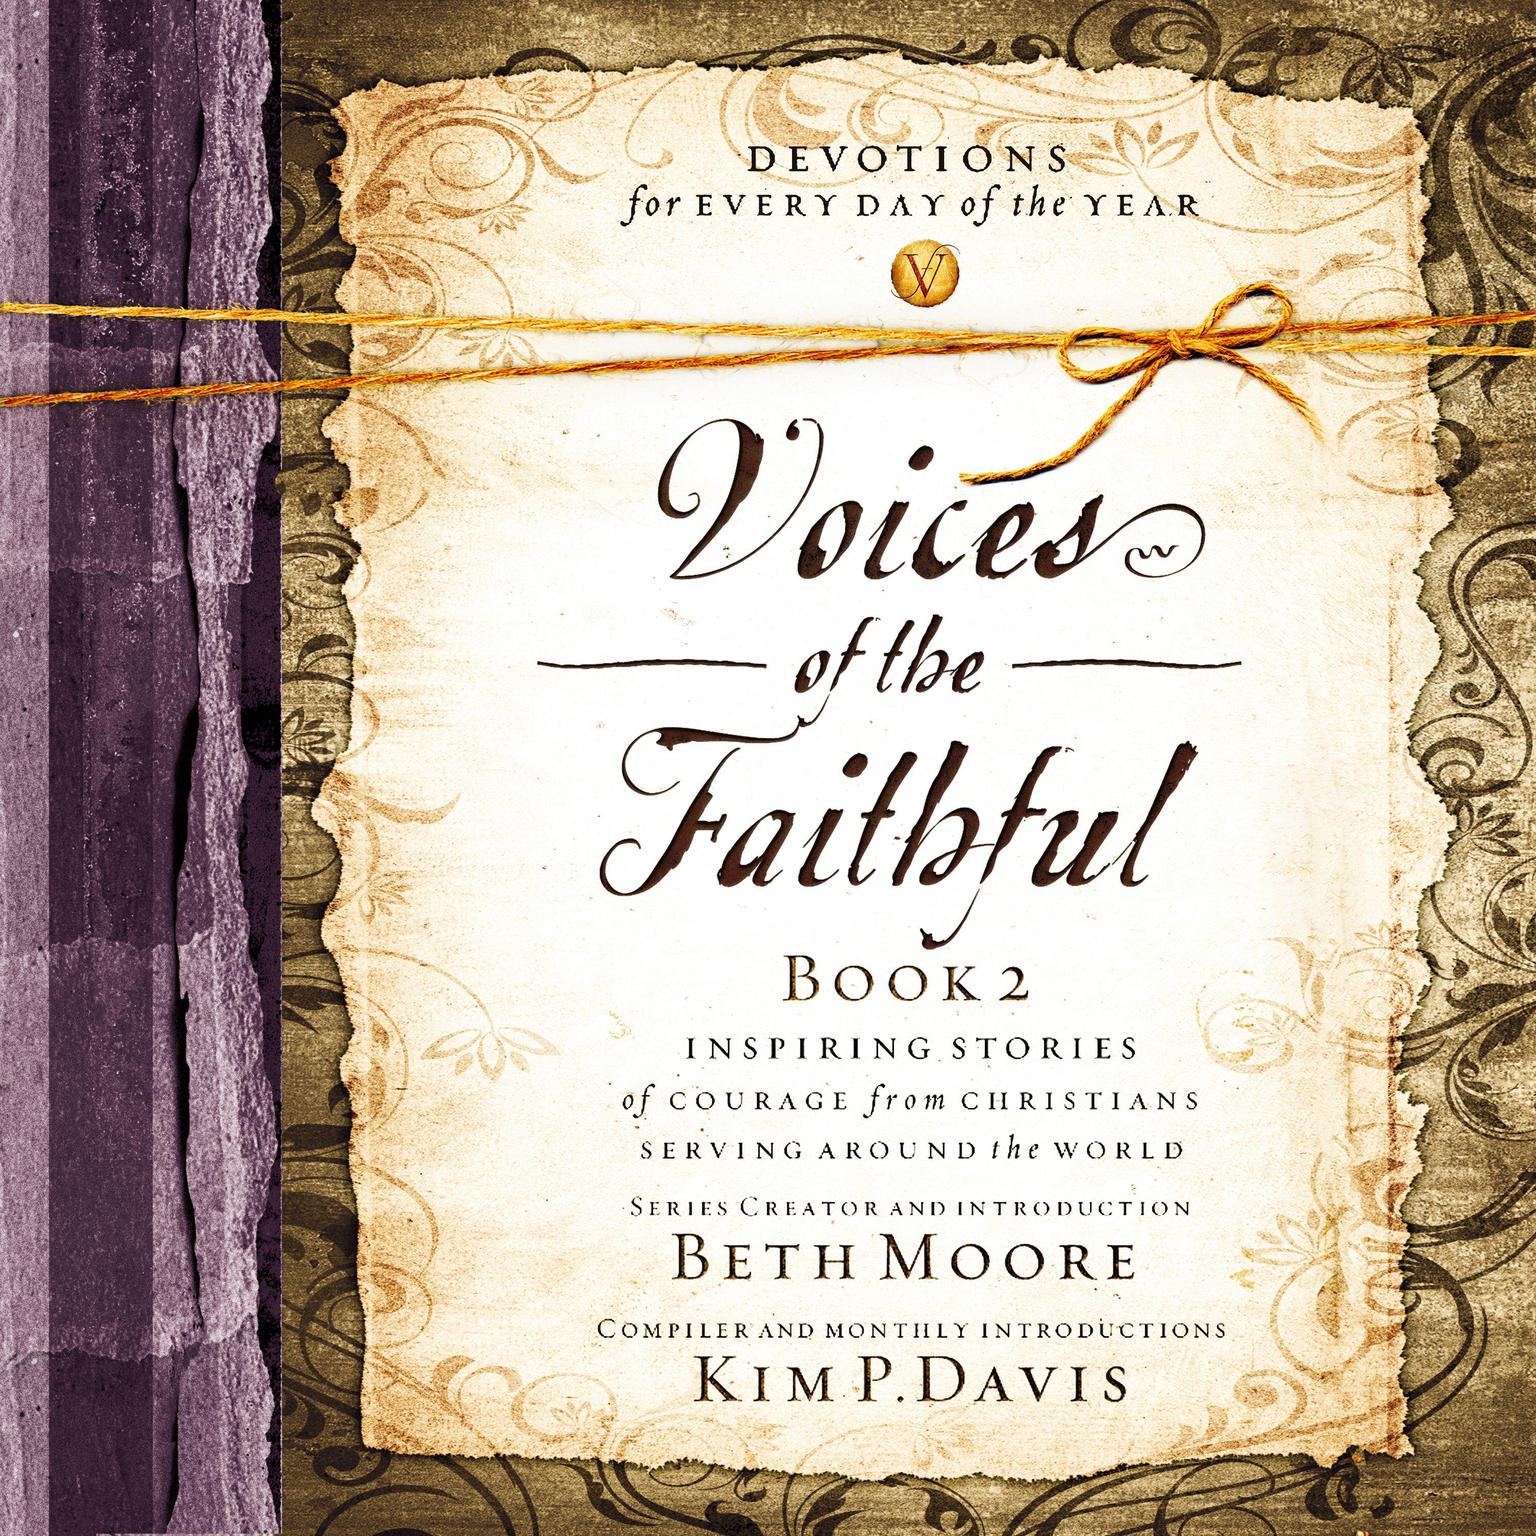 Voices of the Faithful Book 2: Inspiring Stories of Courage from Christians Serving Around the World Audiobook, by Beth Moore